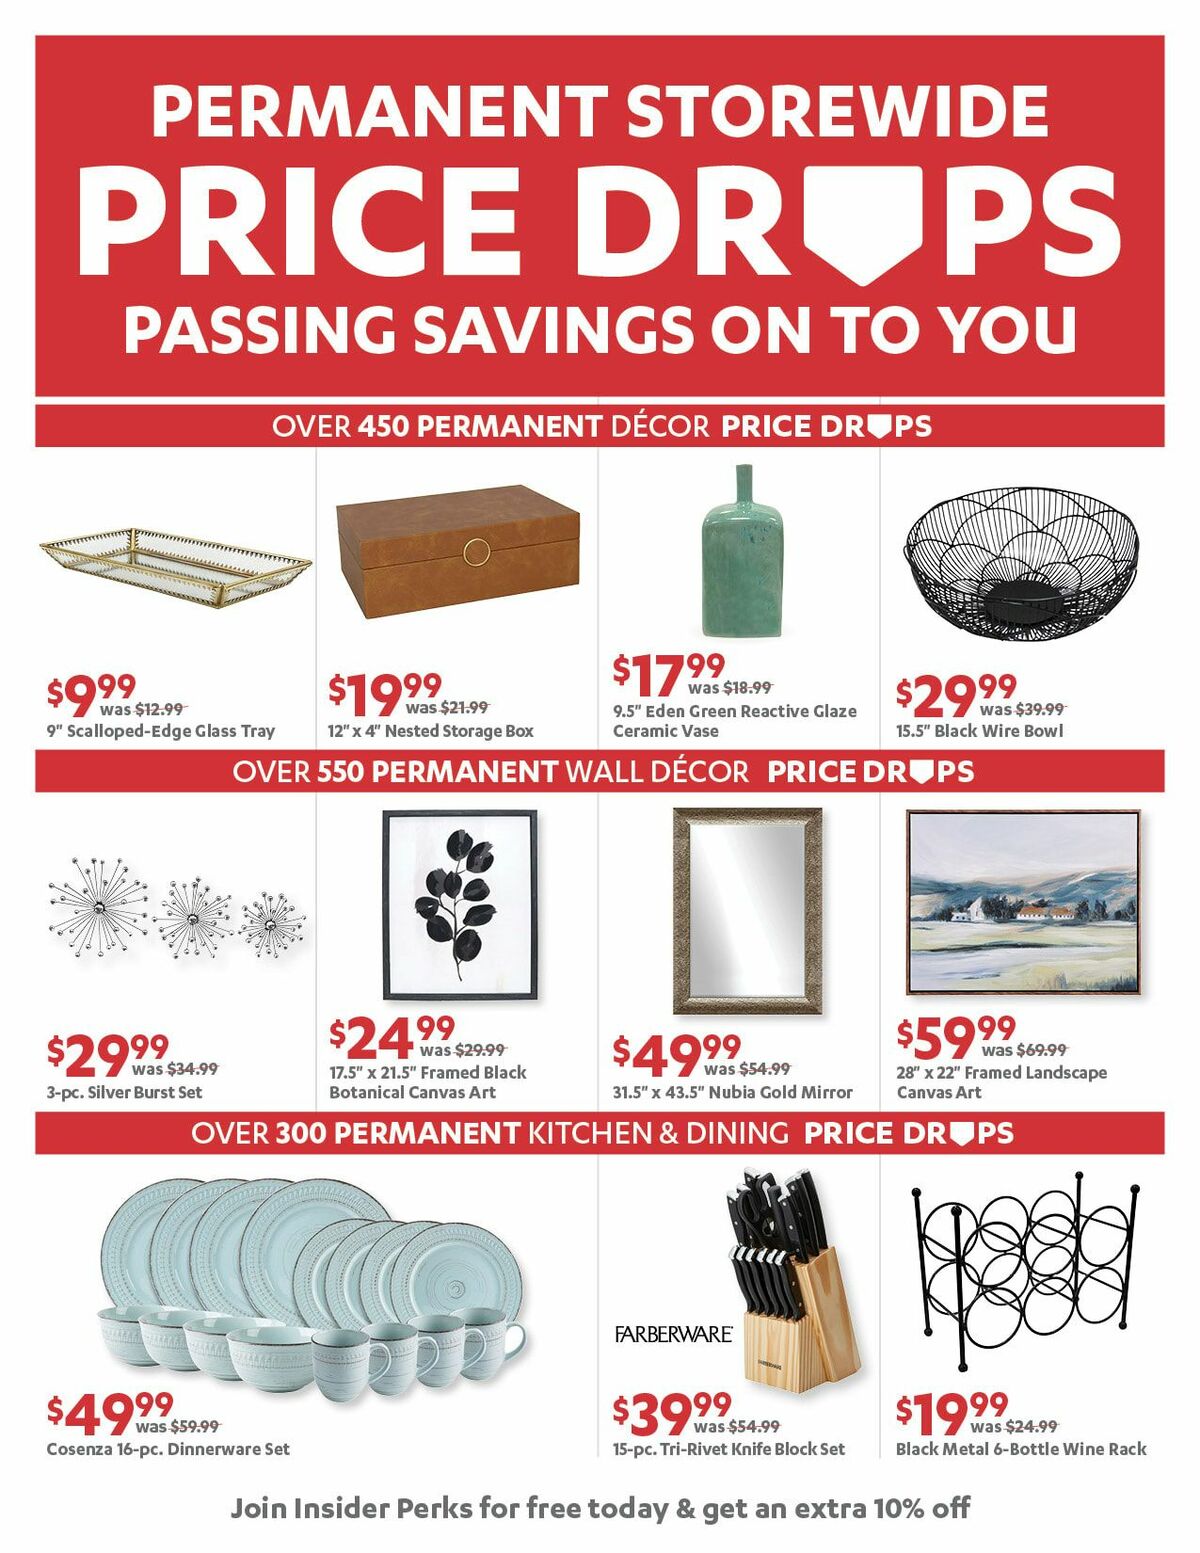 At Home Weekly Ad from January 24